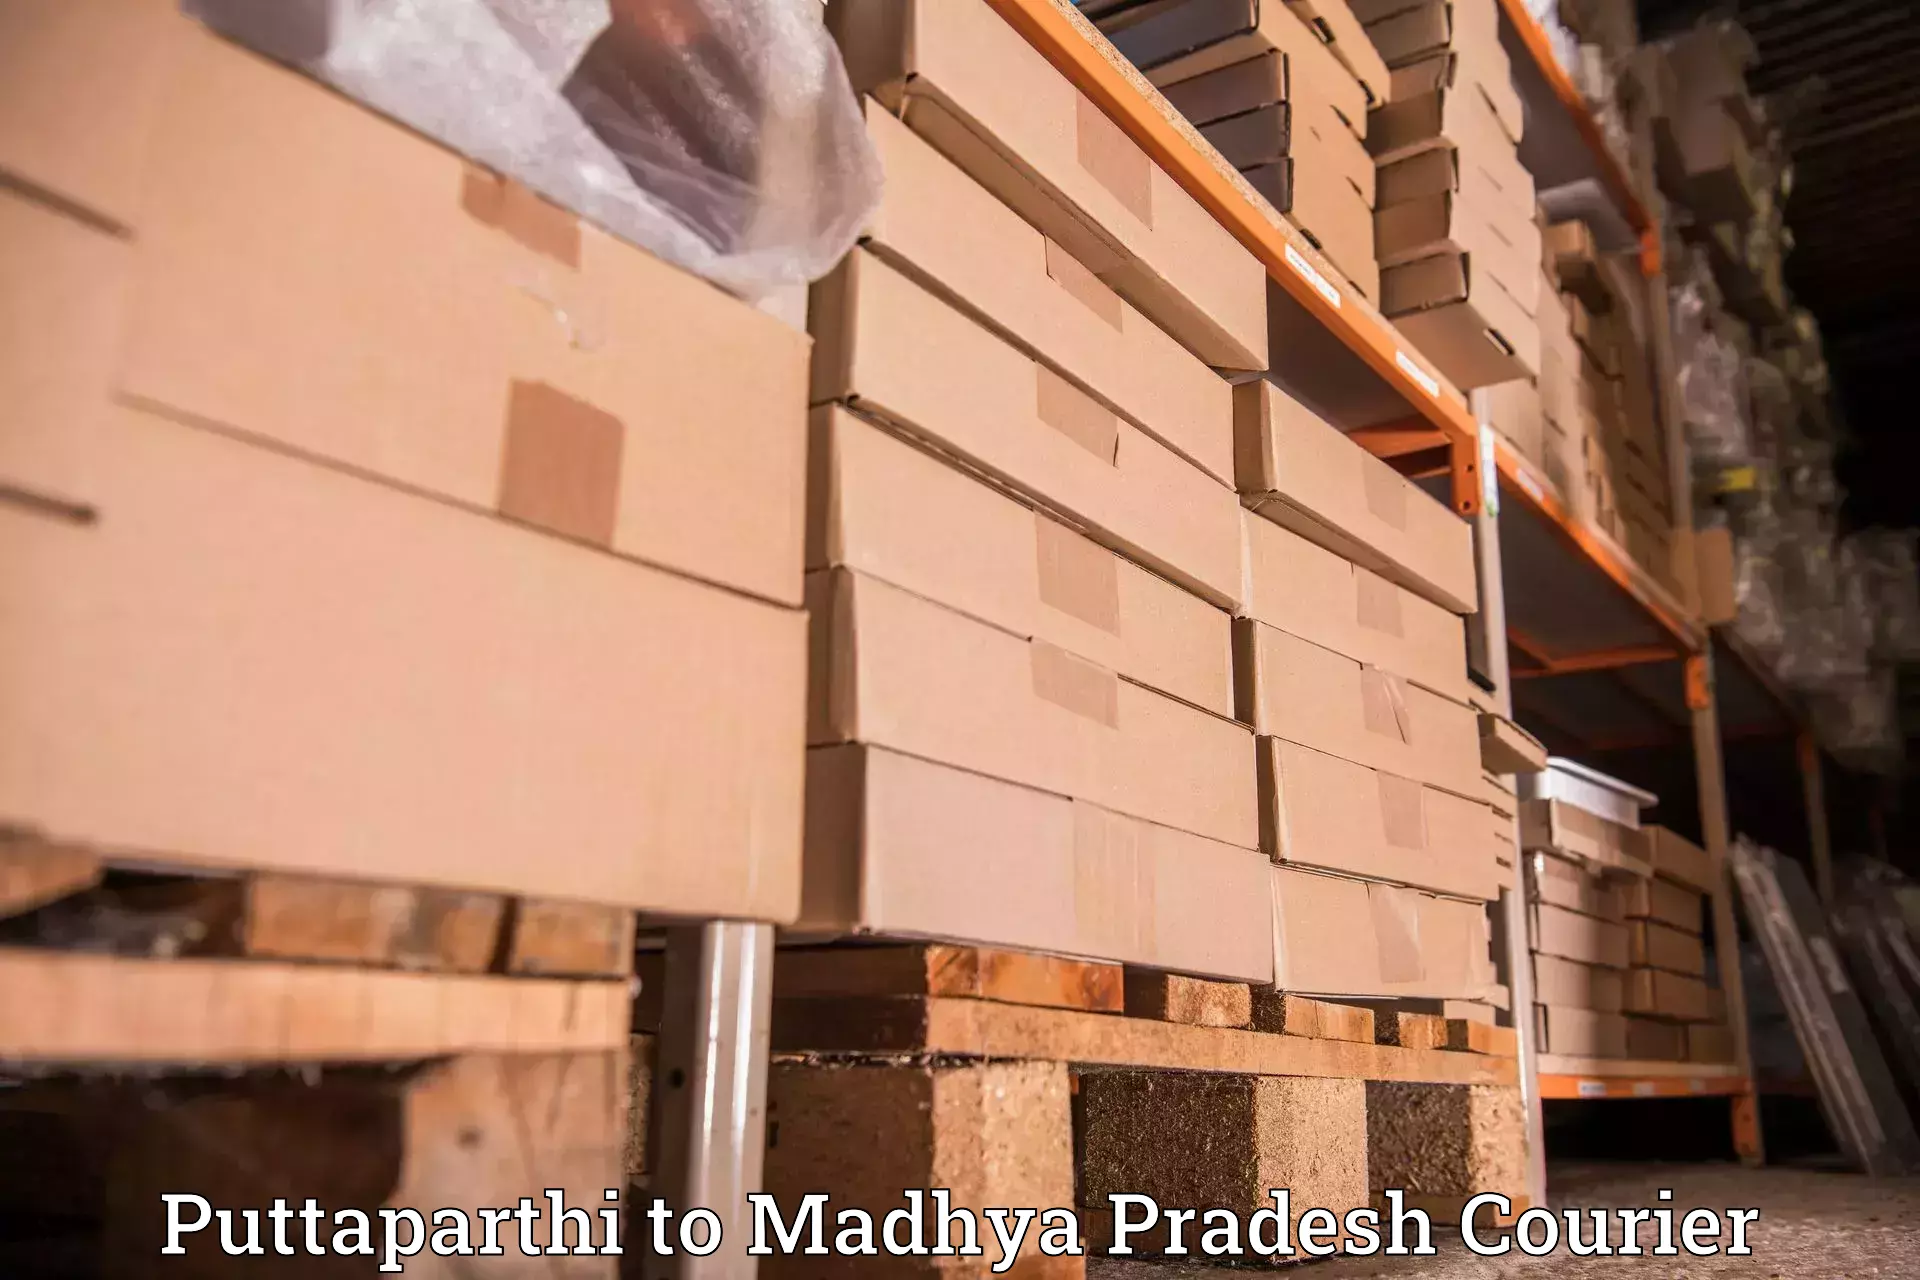 Automated parcel services Puttaparthi to Raipur Karchuliyan